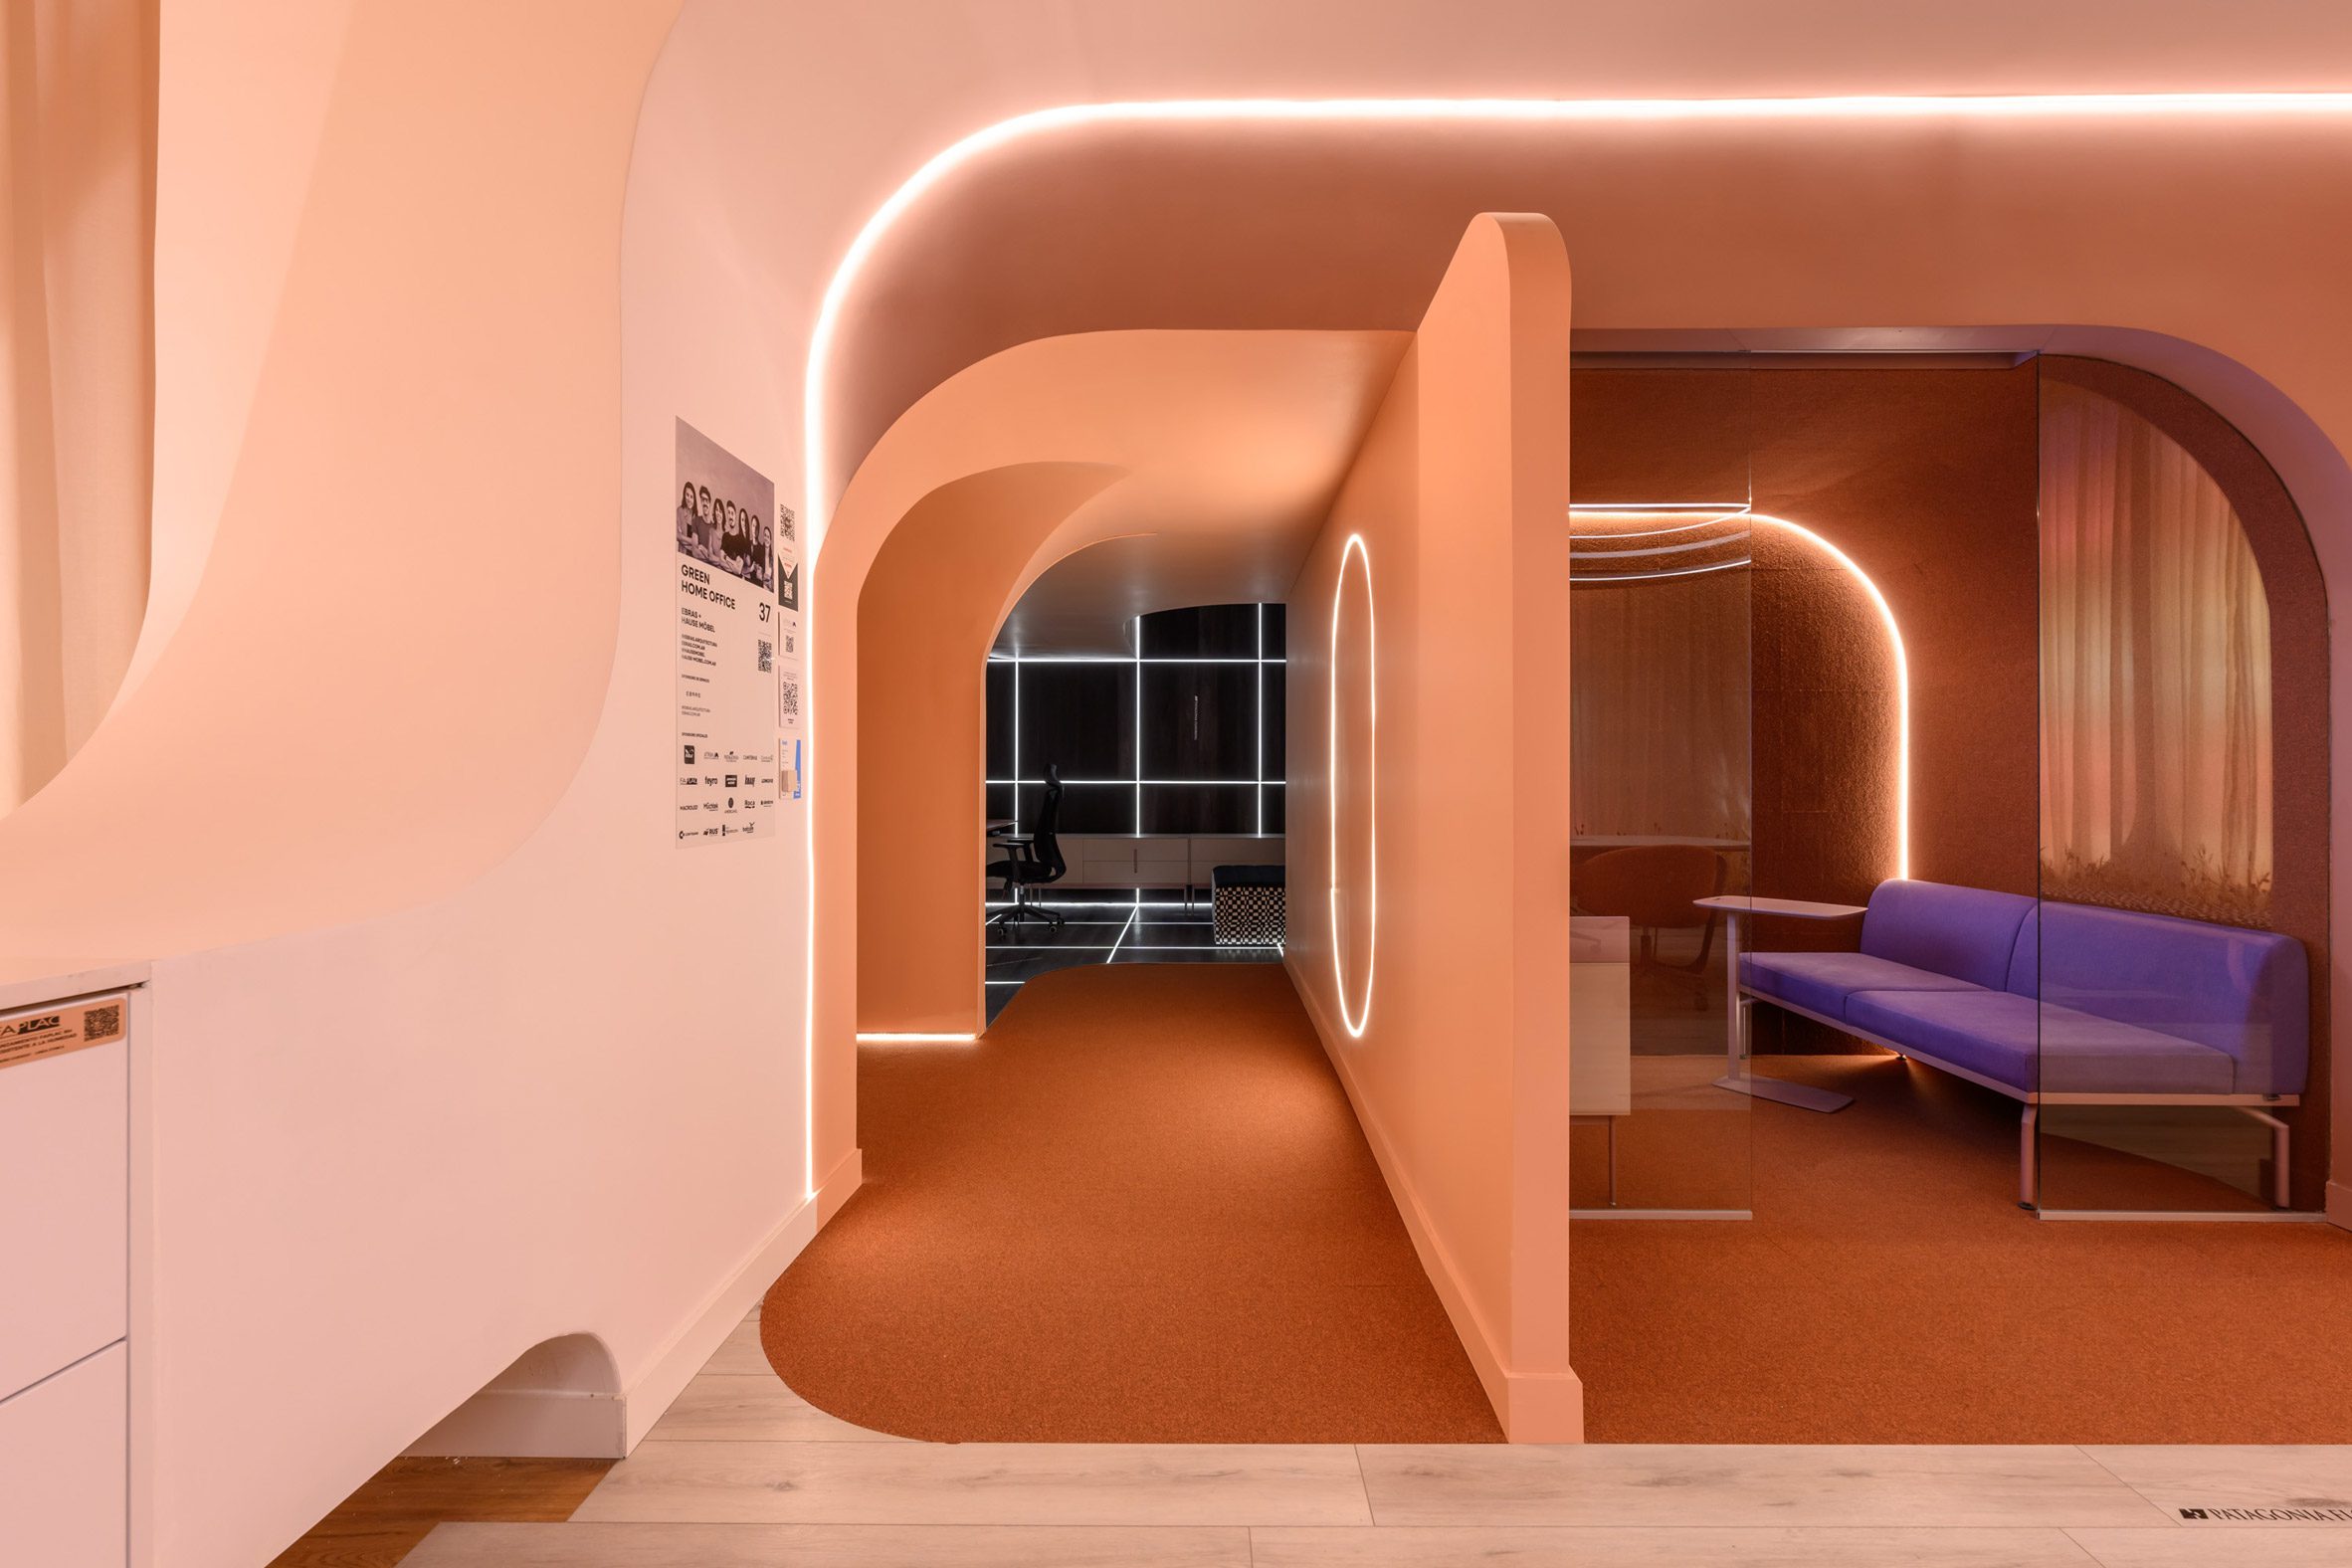 Desert-hued room with curved-edge surfaces and walls